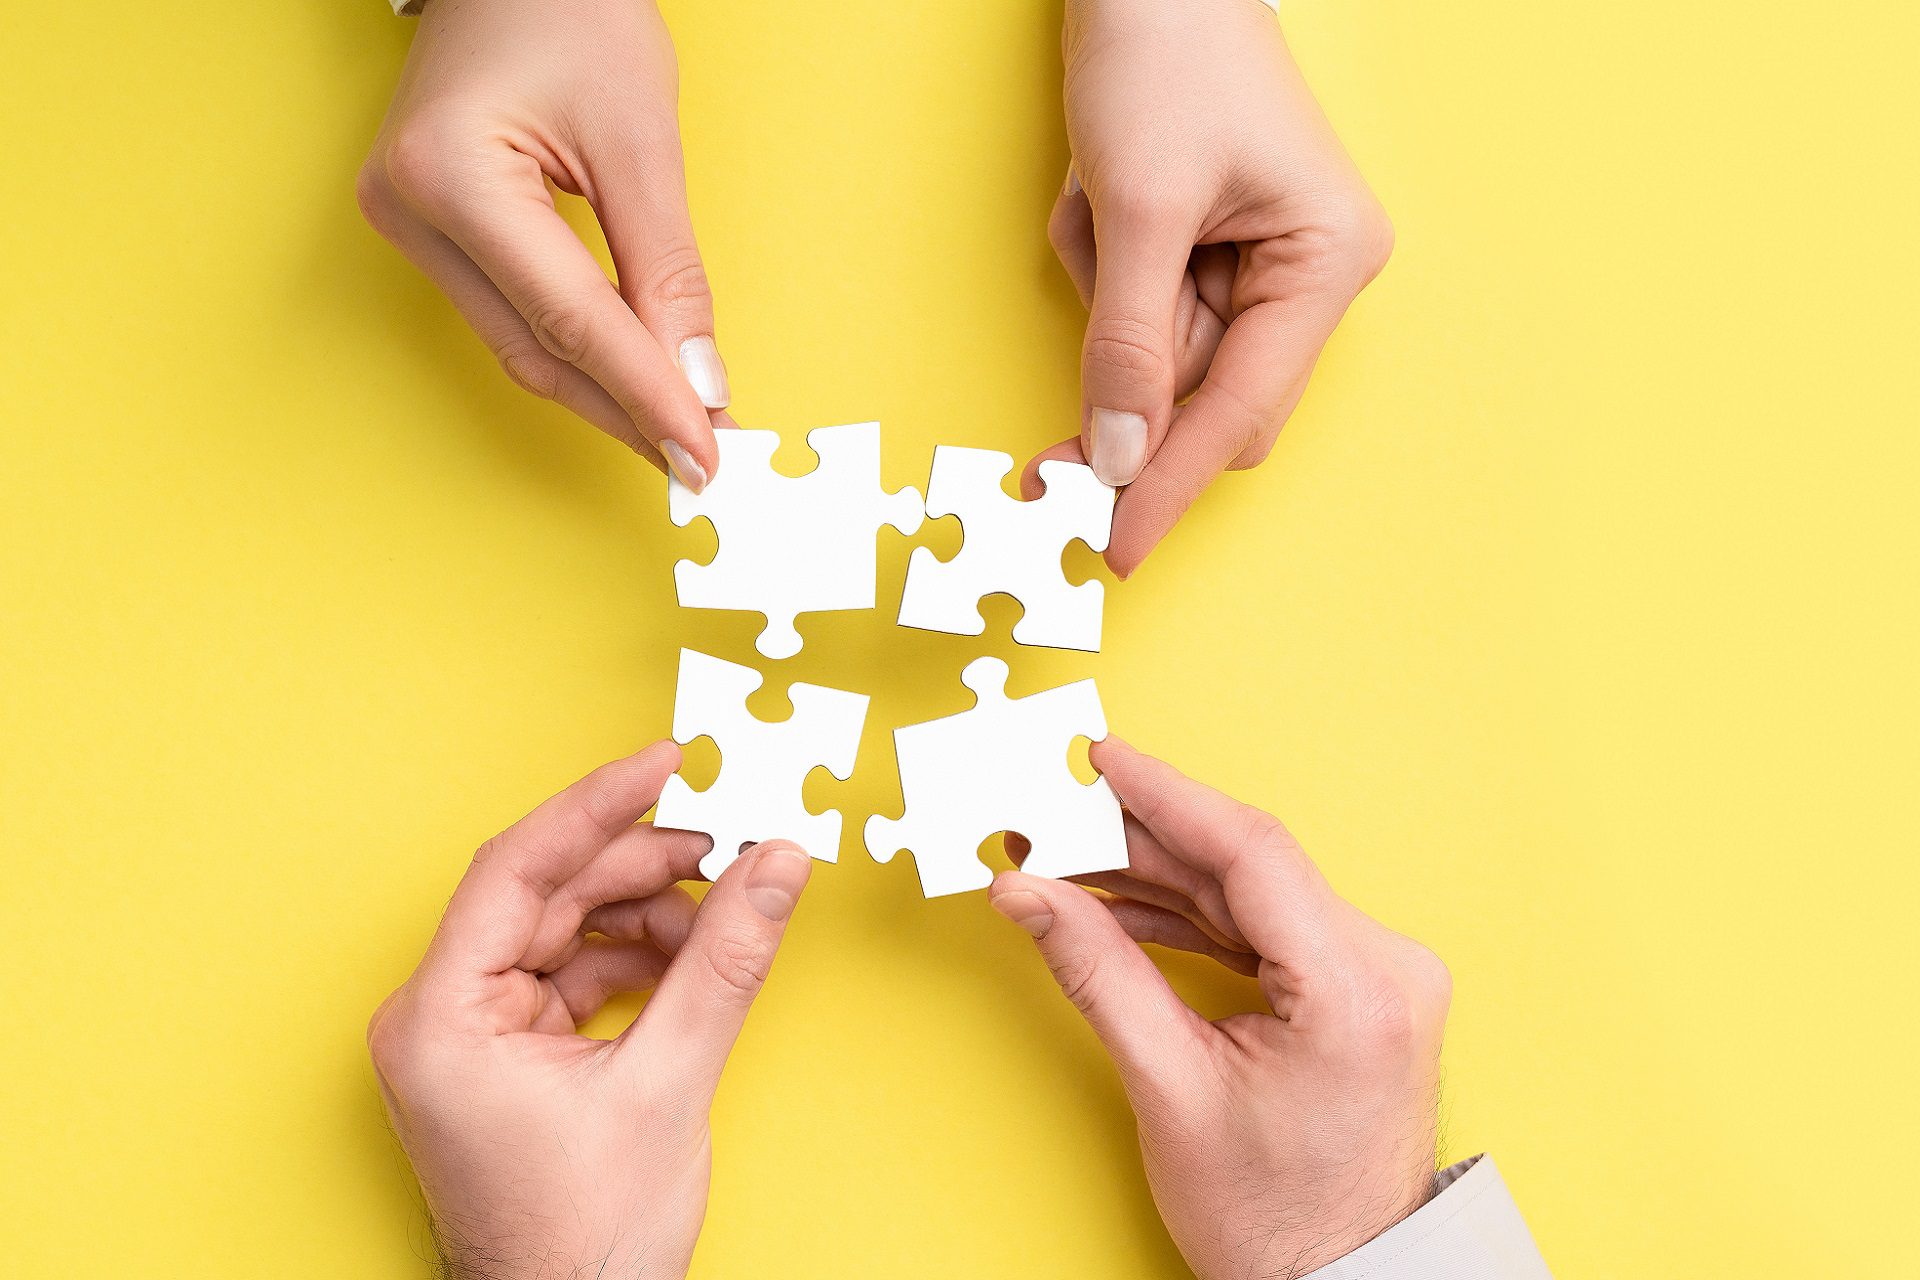 Two pairs of hands trying to fit jigsaw pieces together, symbolizing the power of working together with Emercury to craft strategies